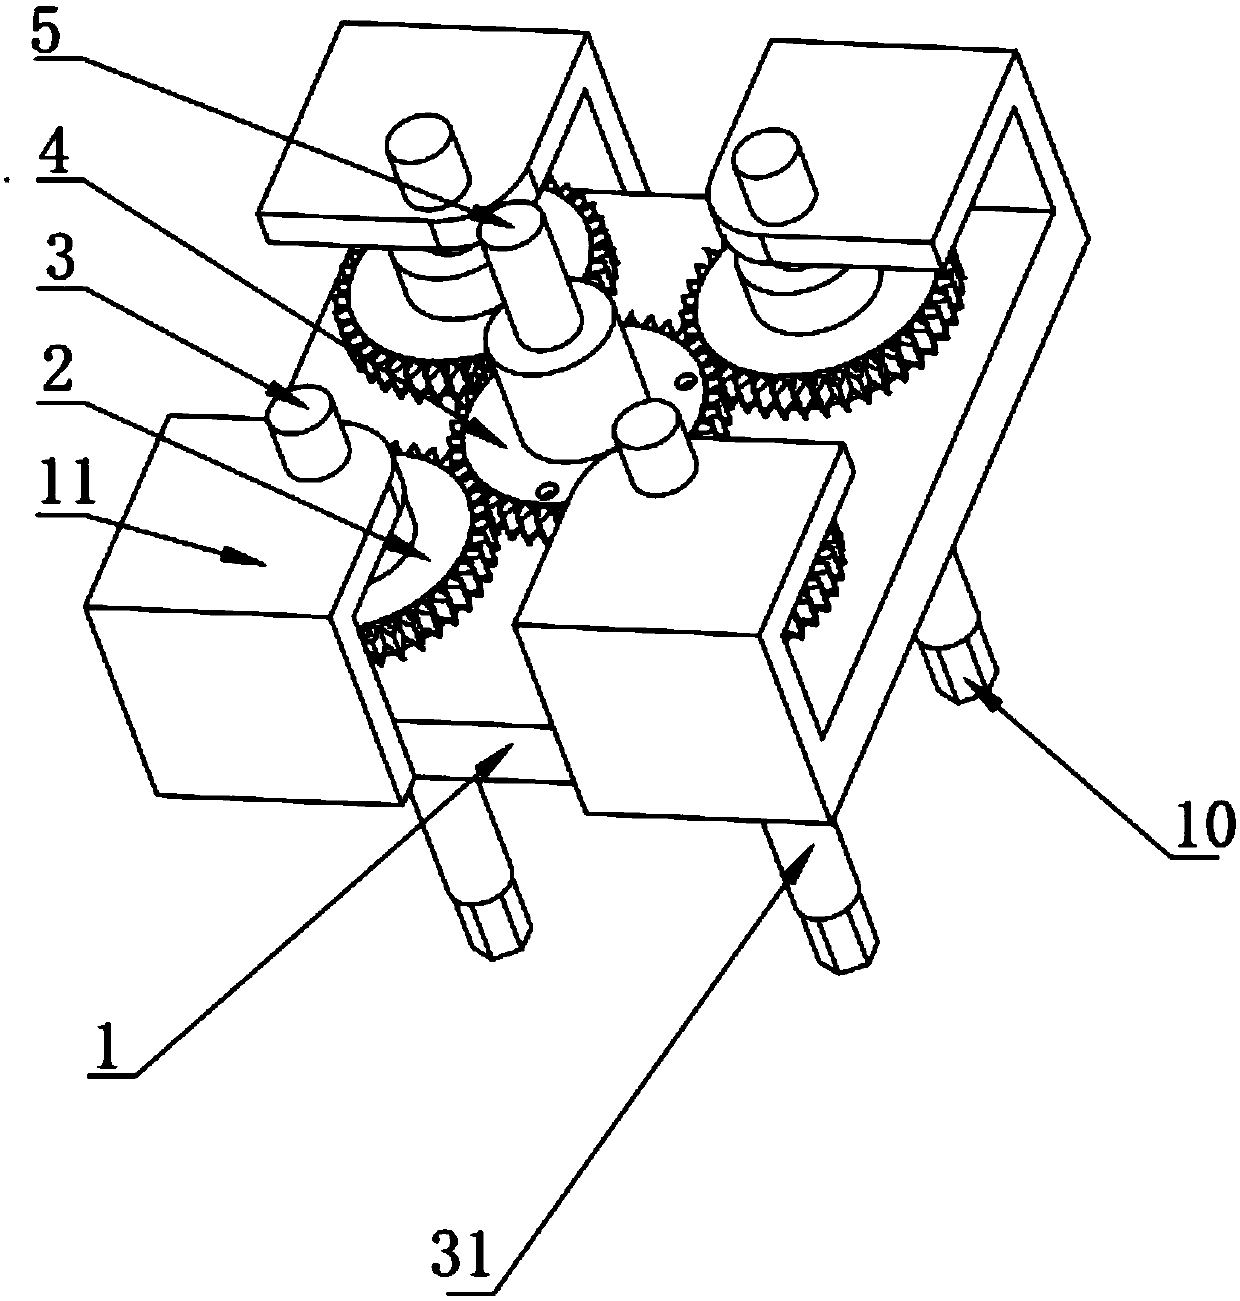 Synchronous fastening device